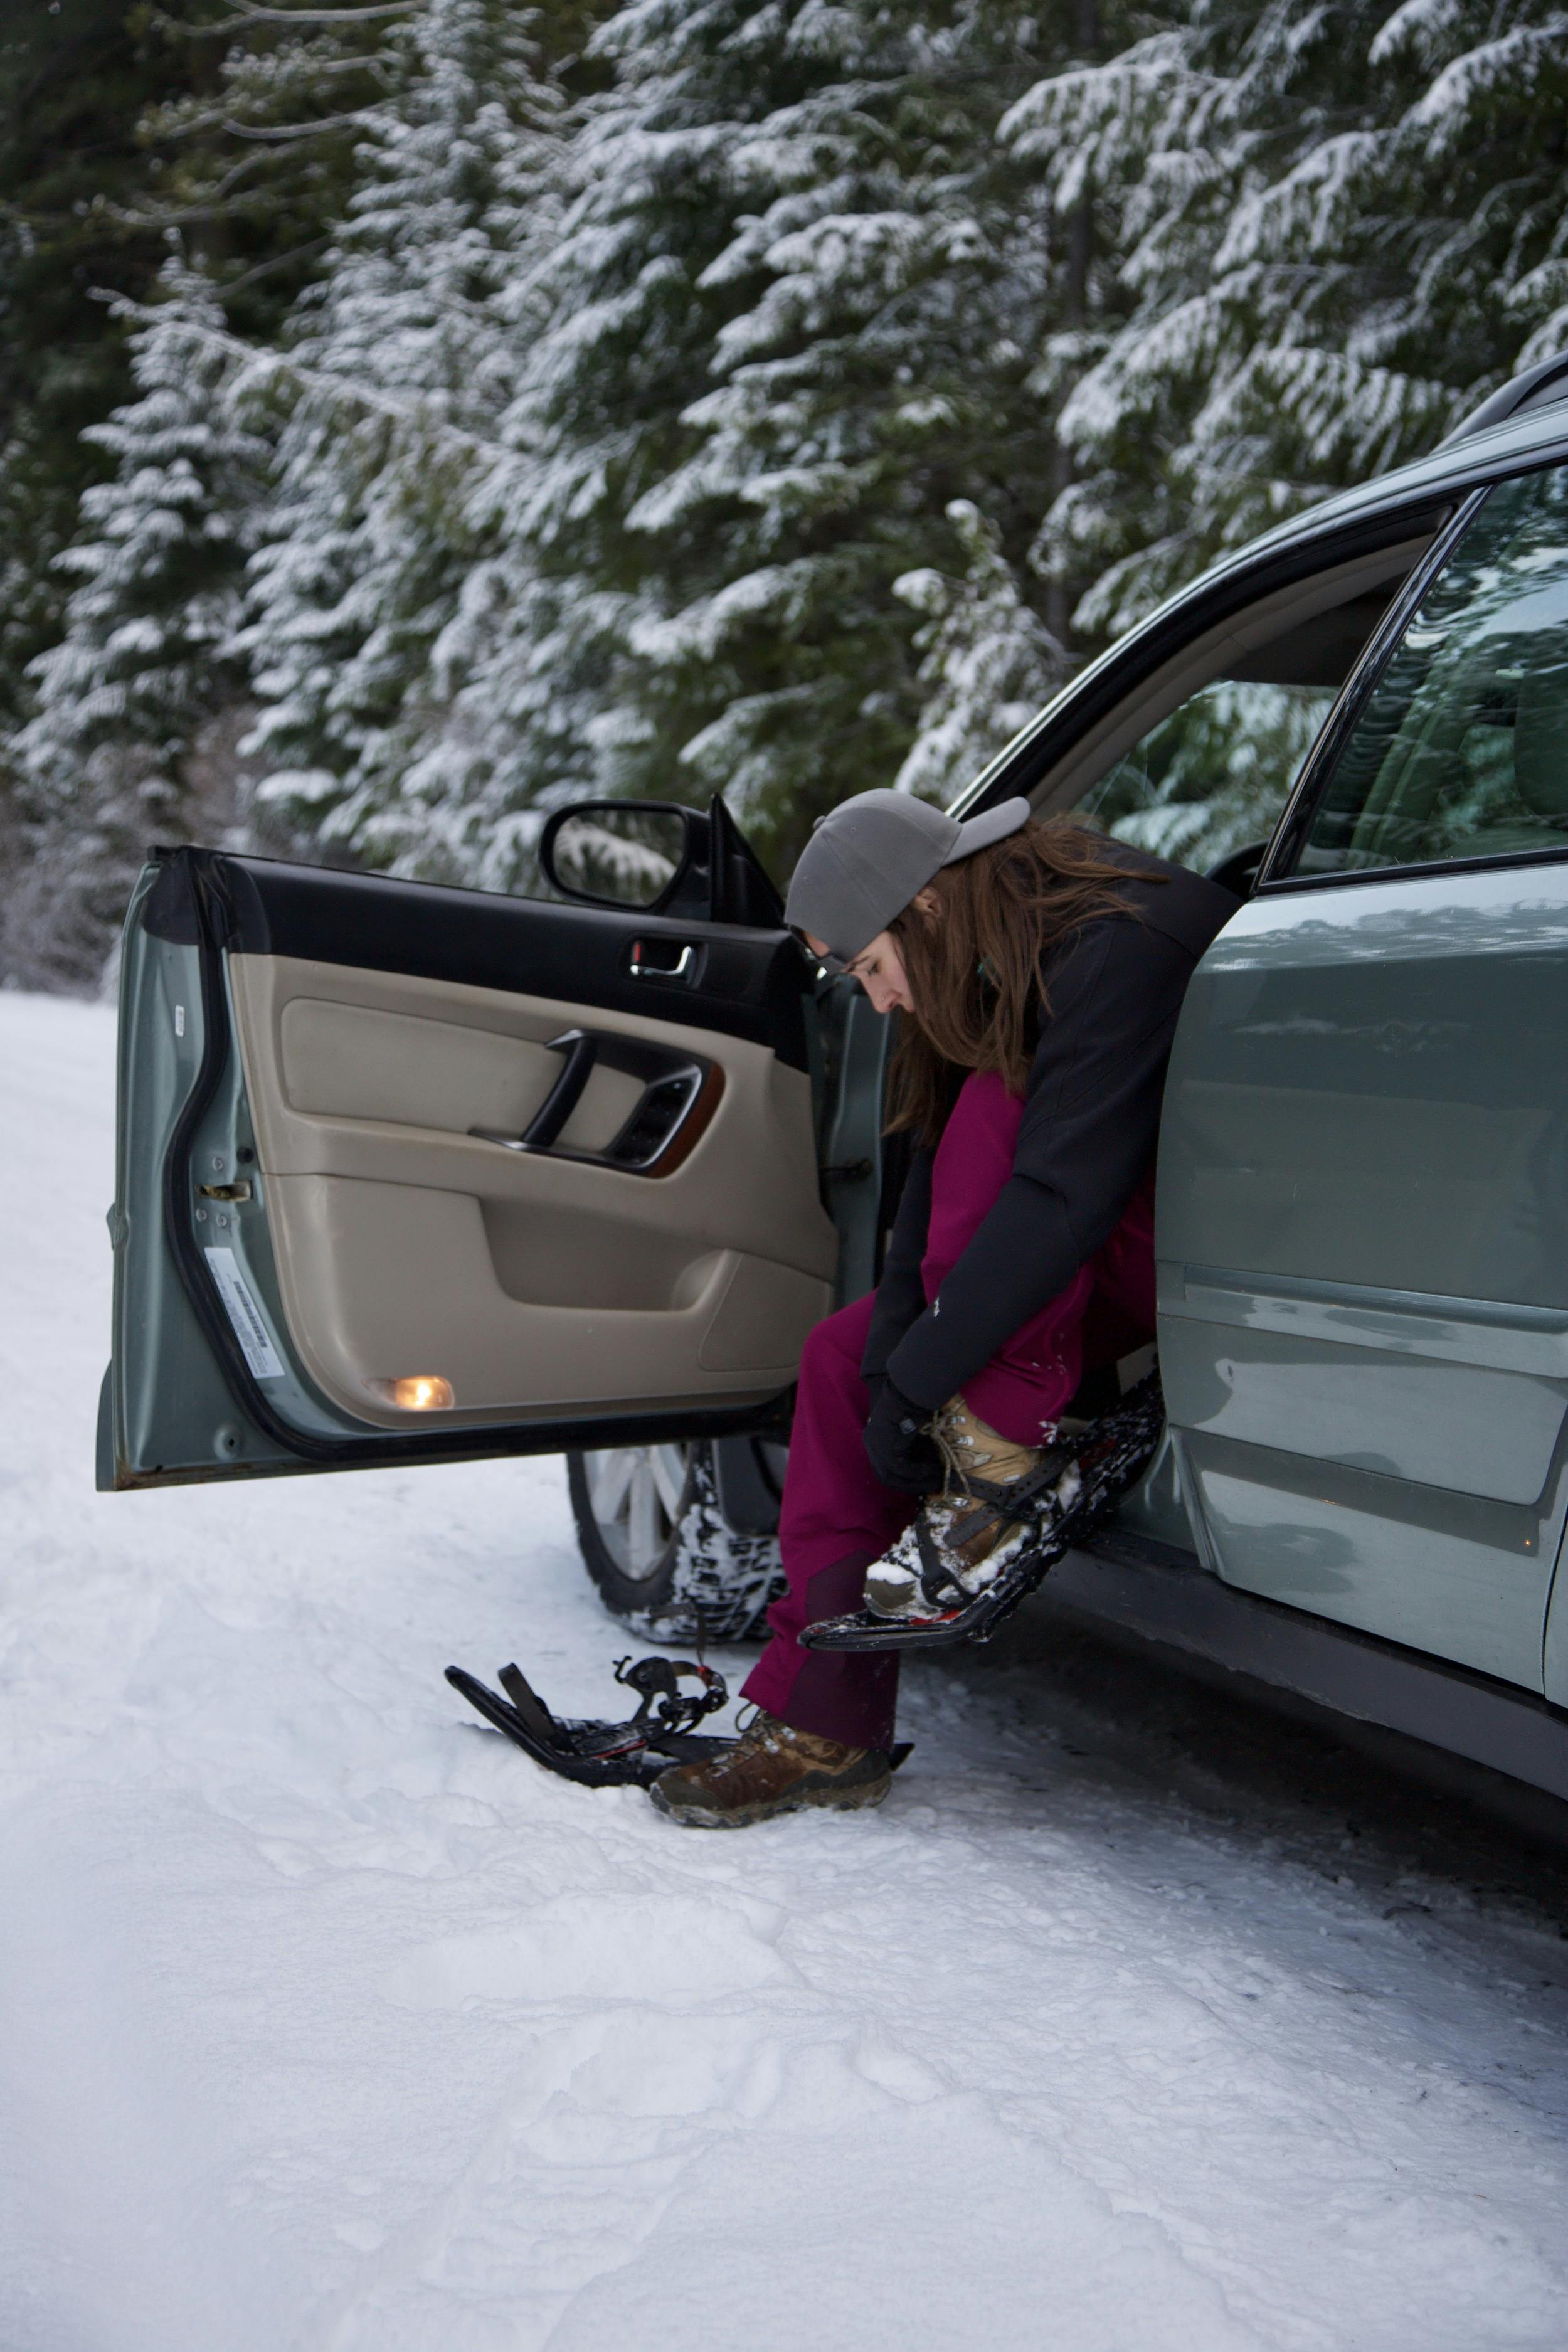 Outdoor enthusiast putting on a pair of snow shoes at the trailhead in their car.